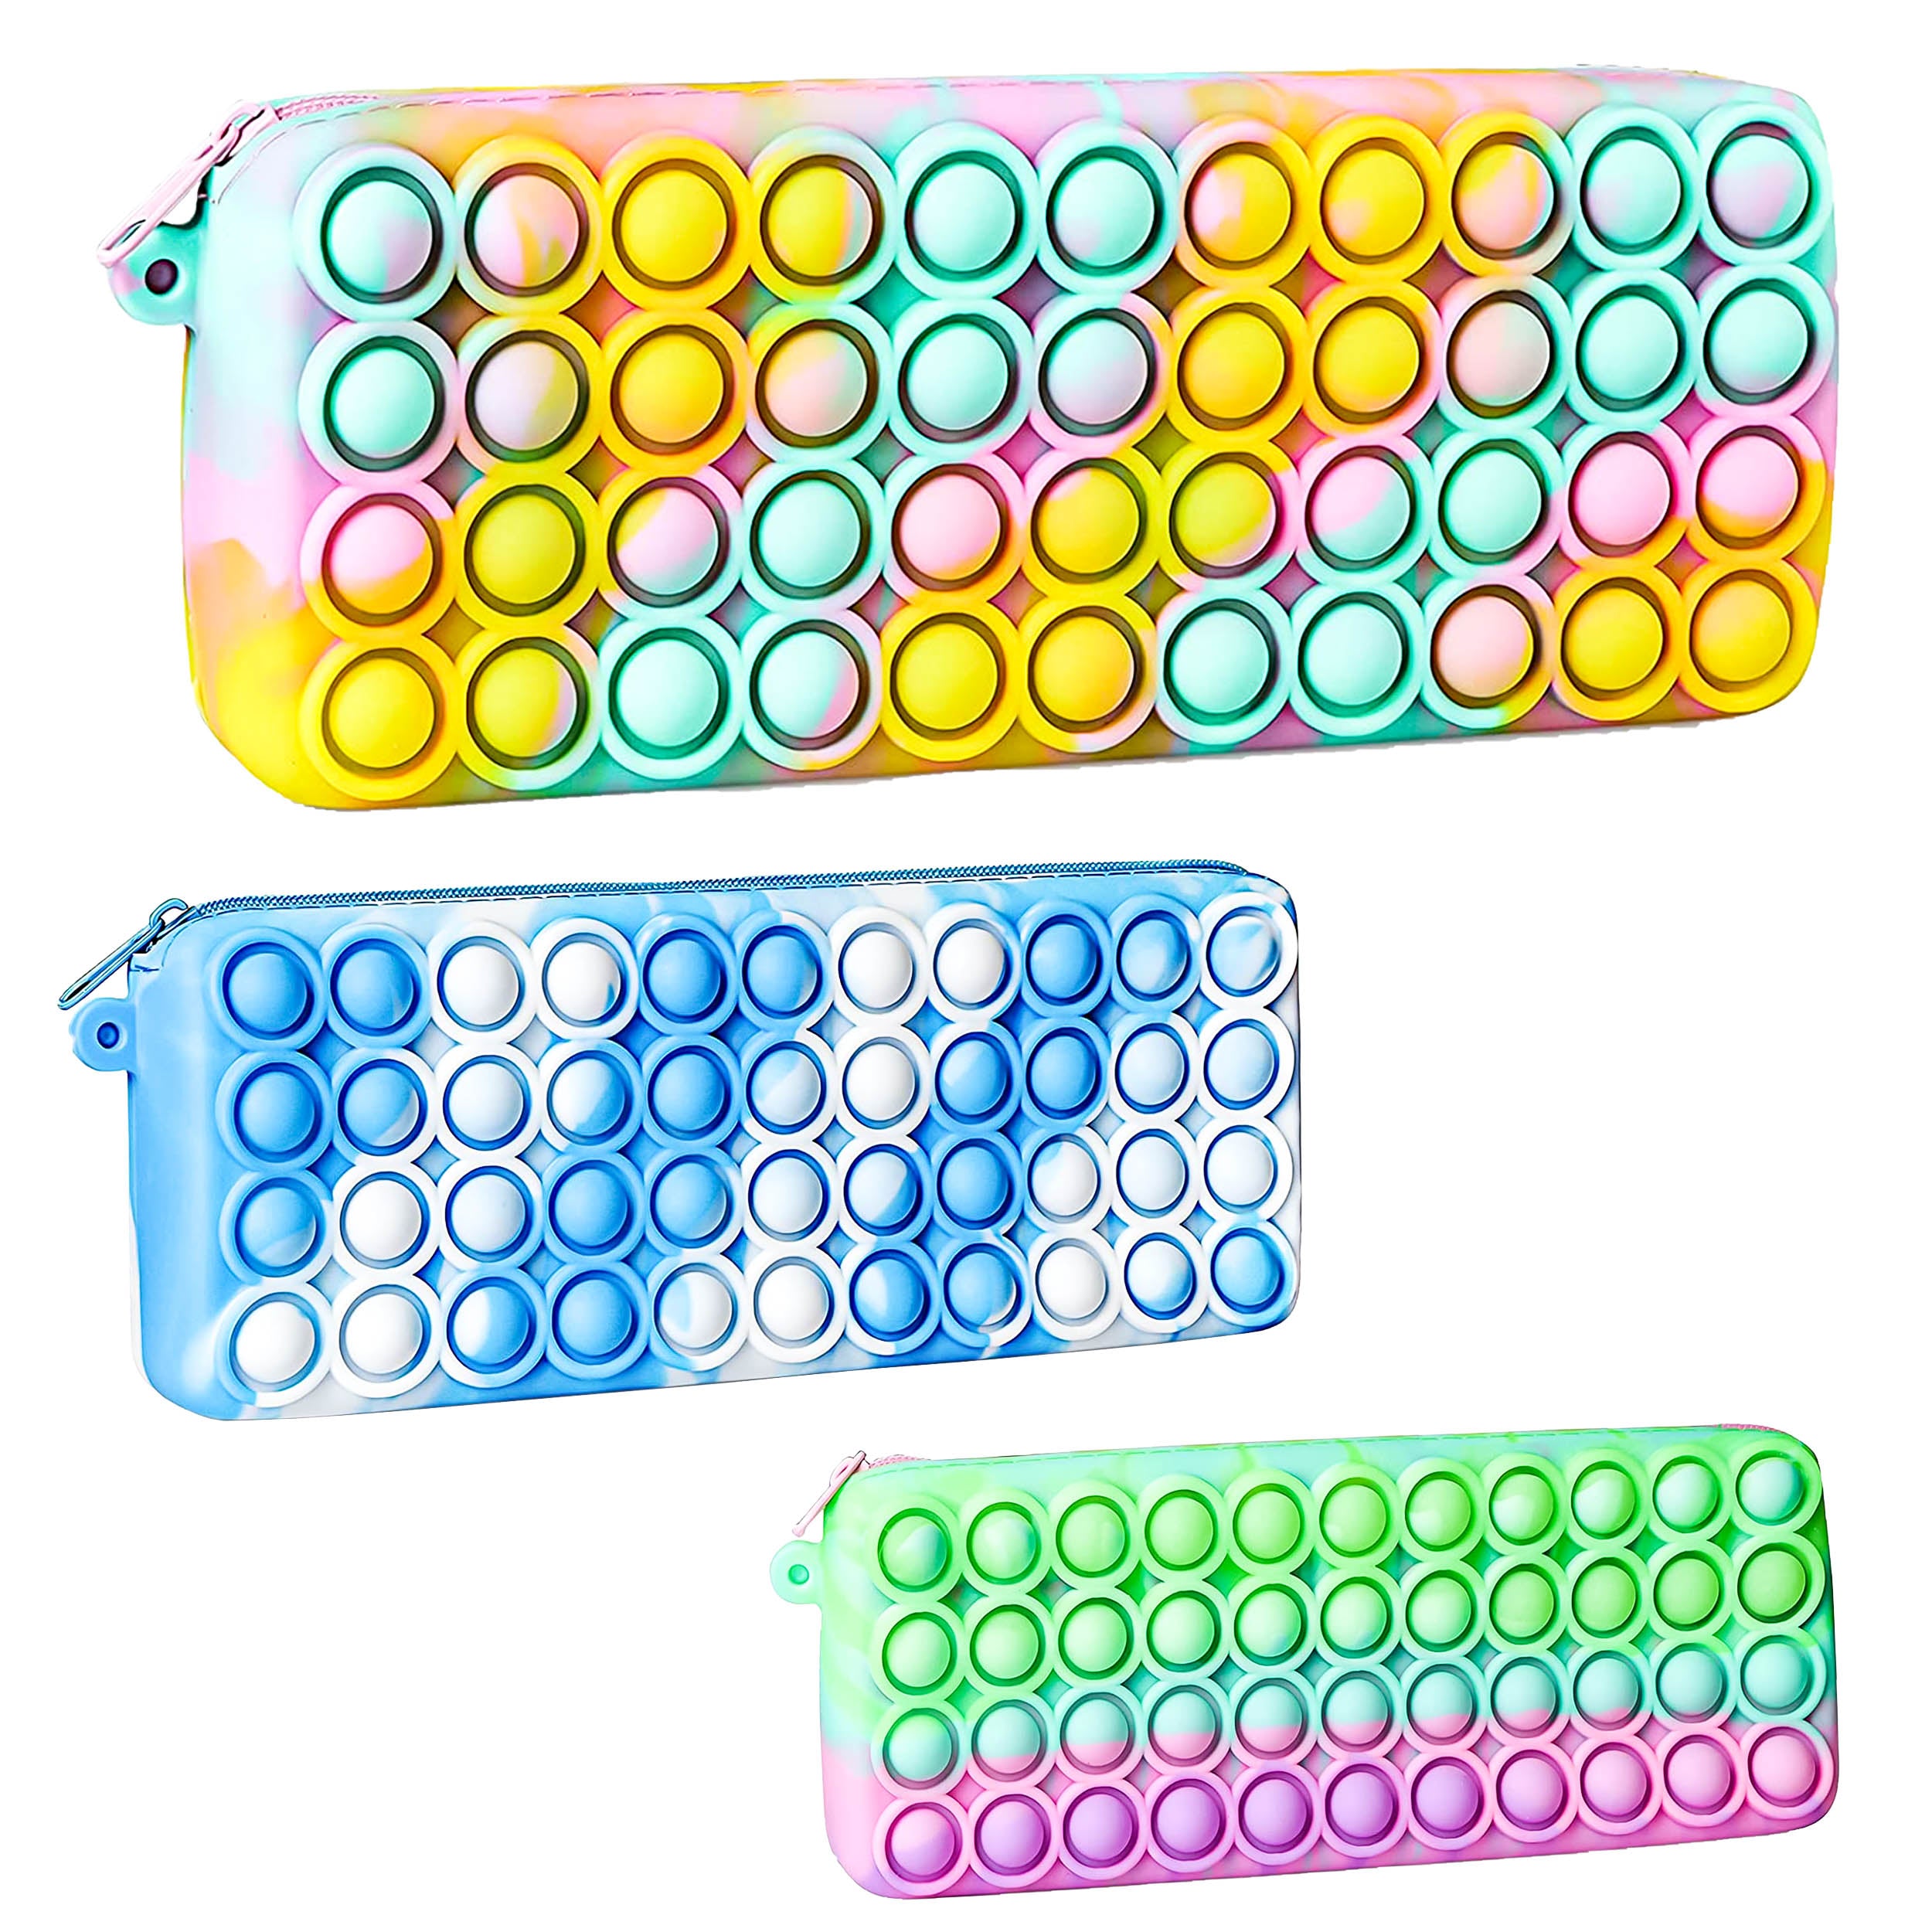 Keep Your Pencils Safe and Relieve Stress with our Pencil Pop It Case